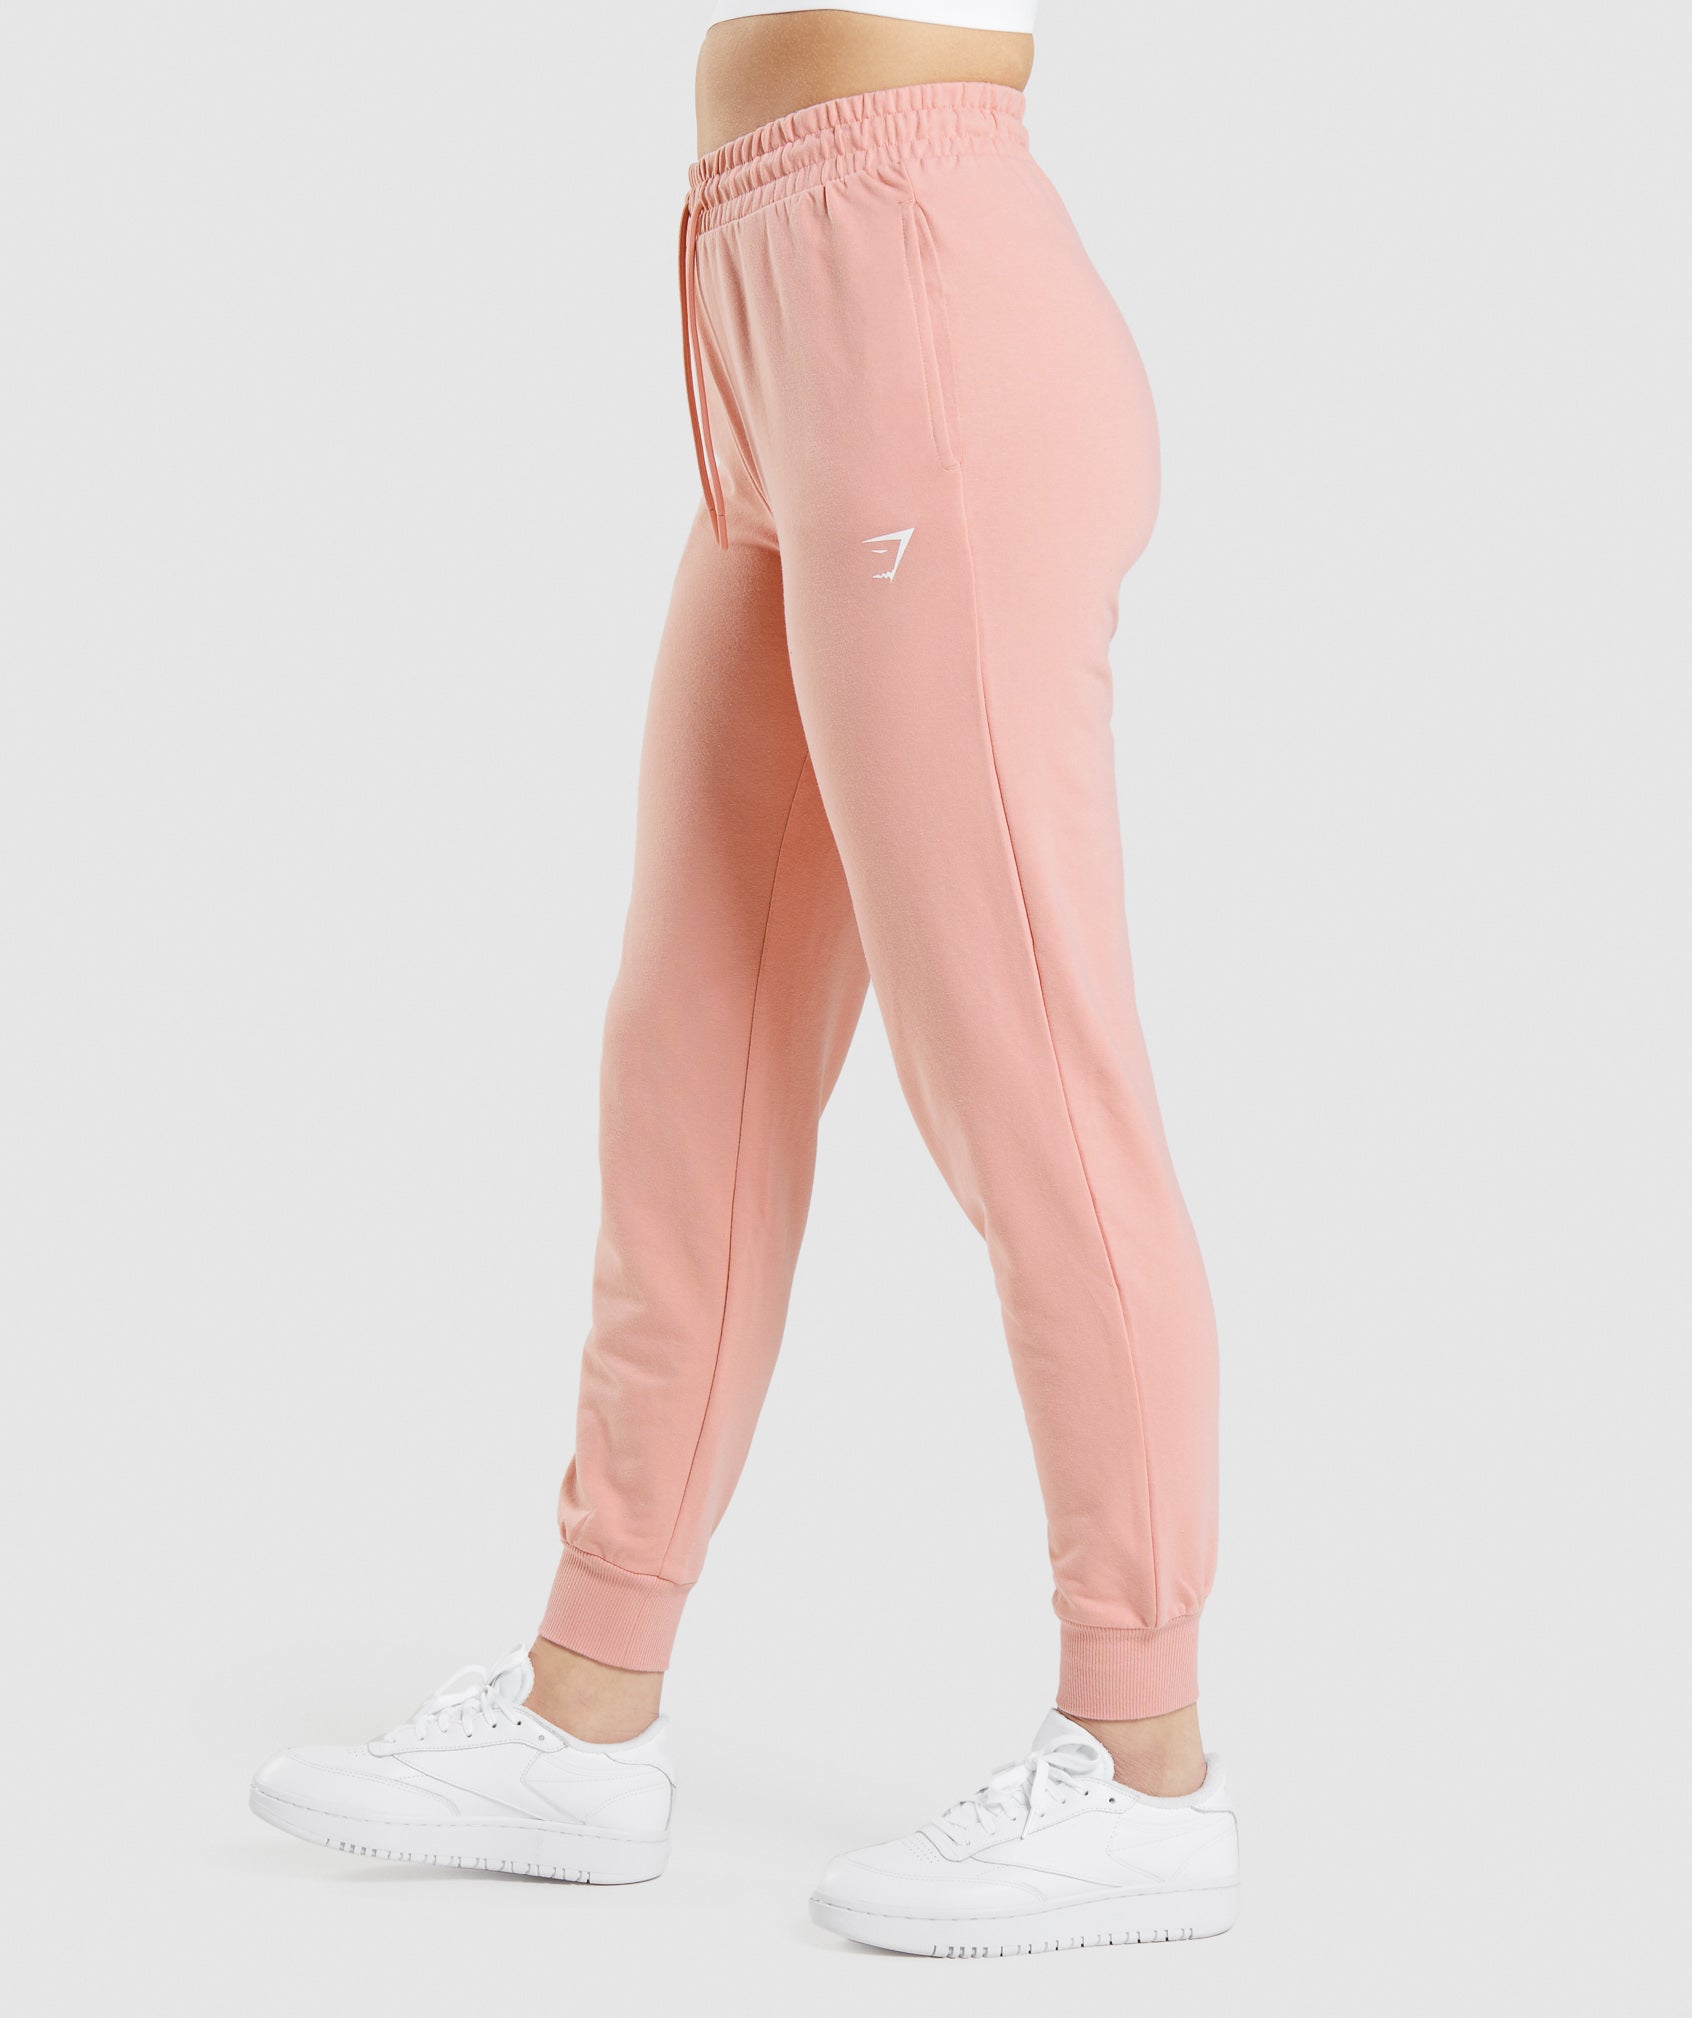 Training Joggers in Paige Pink - view 3